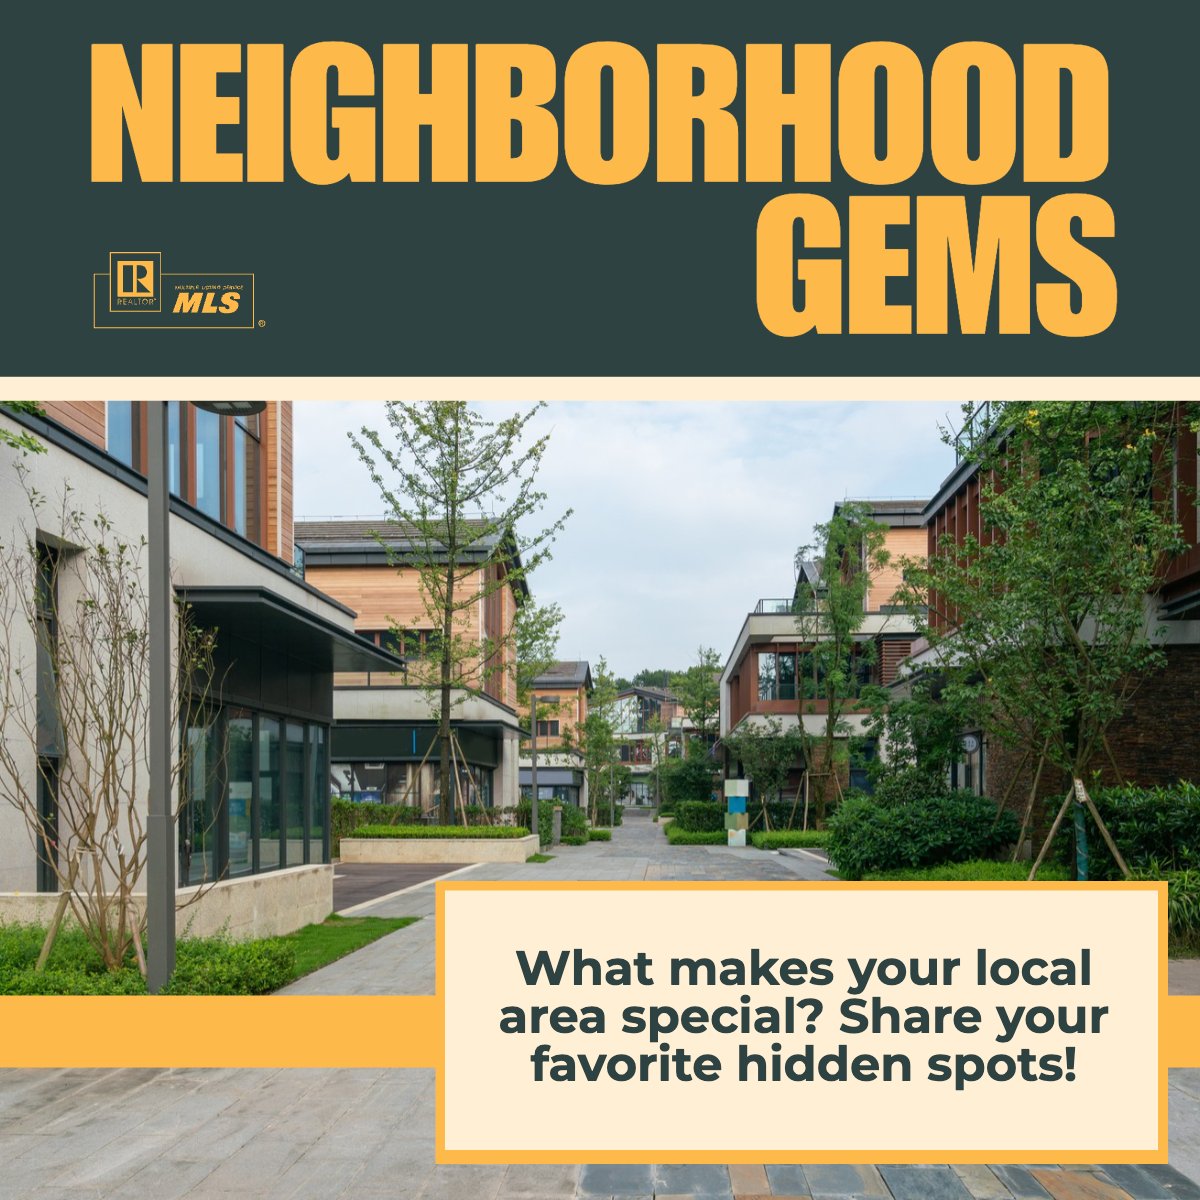 What would you recommend in your local communities? 

Are there any hidden cafes, bookshops, or restaurants? 

Please share them below!

#LocalGems #CommunitySupport #LocalBusinesses 
 #homeownershipmatters #homeownershipgoals #ExperienceitMatters #MountainLifeStyle